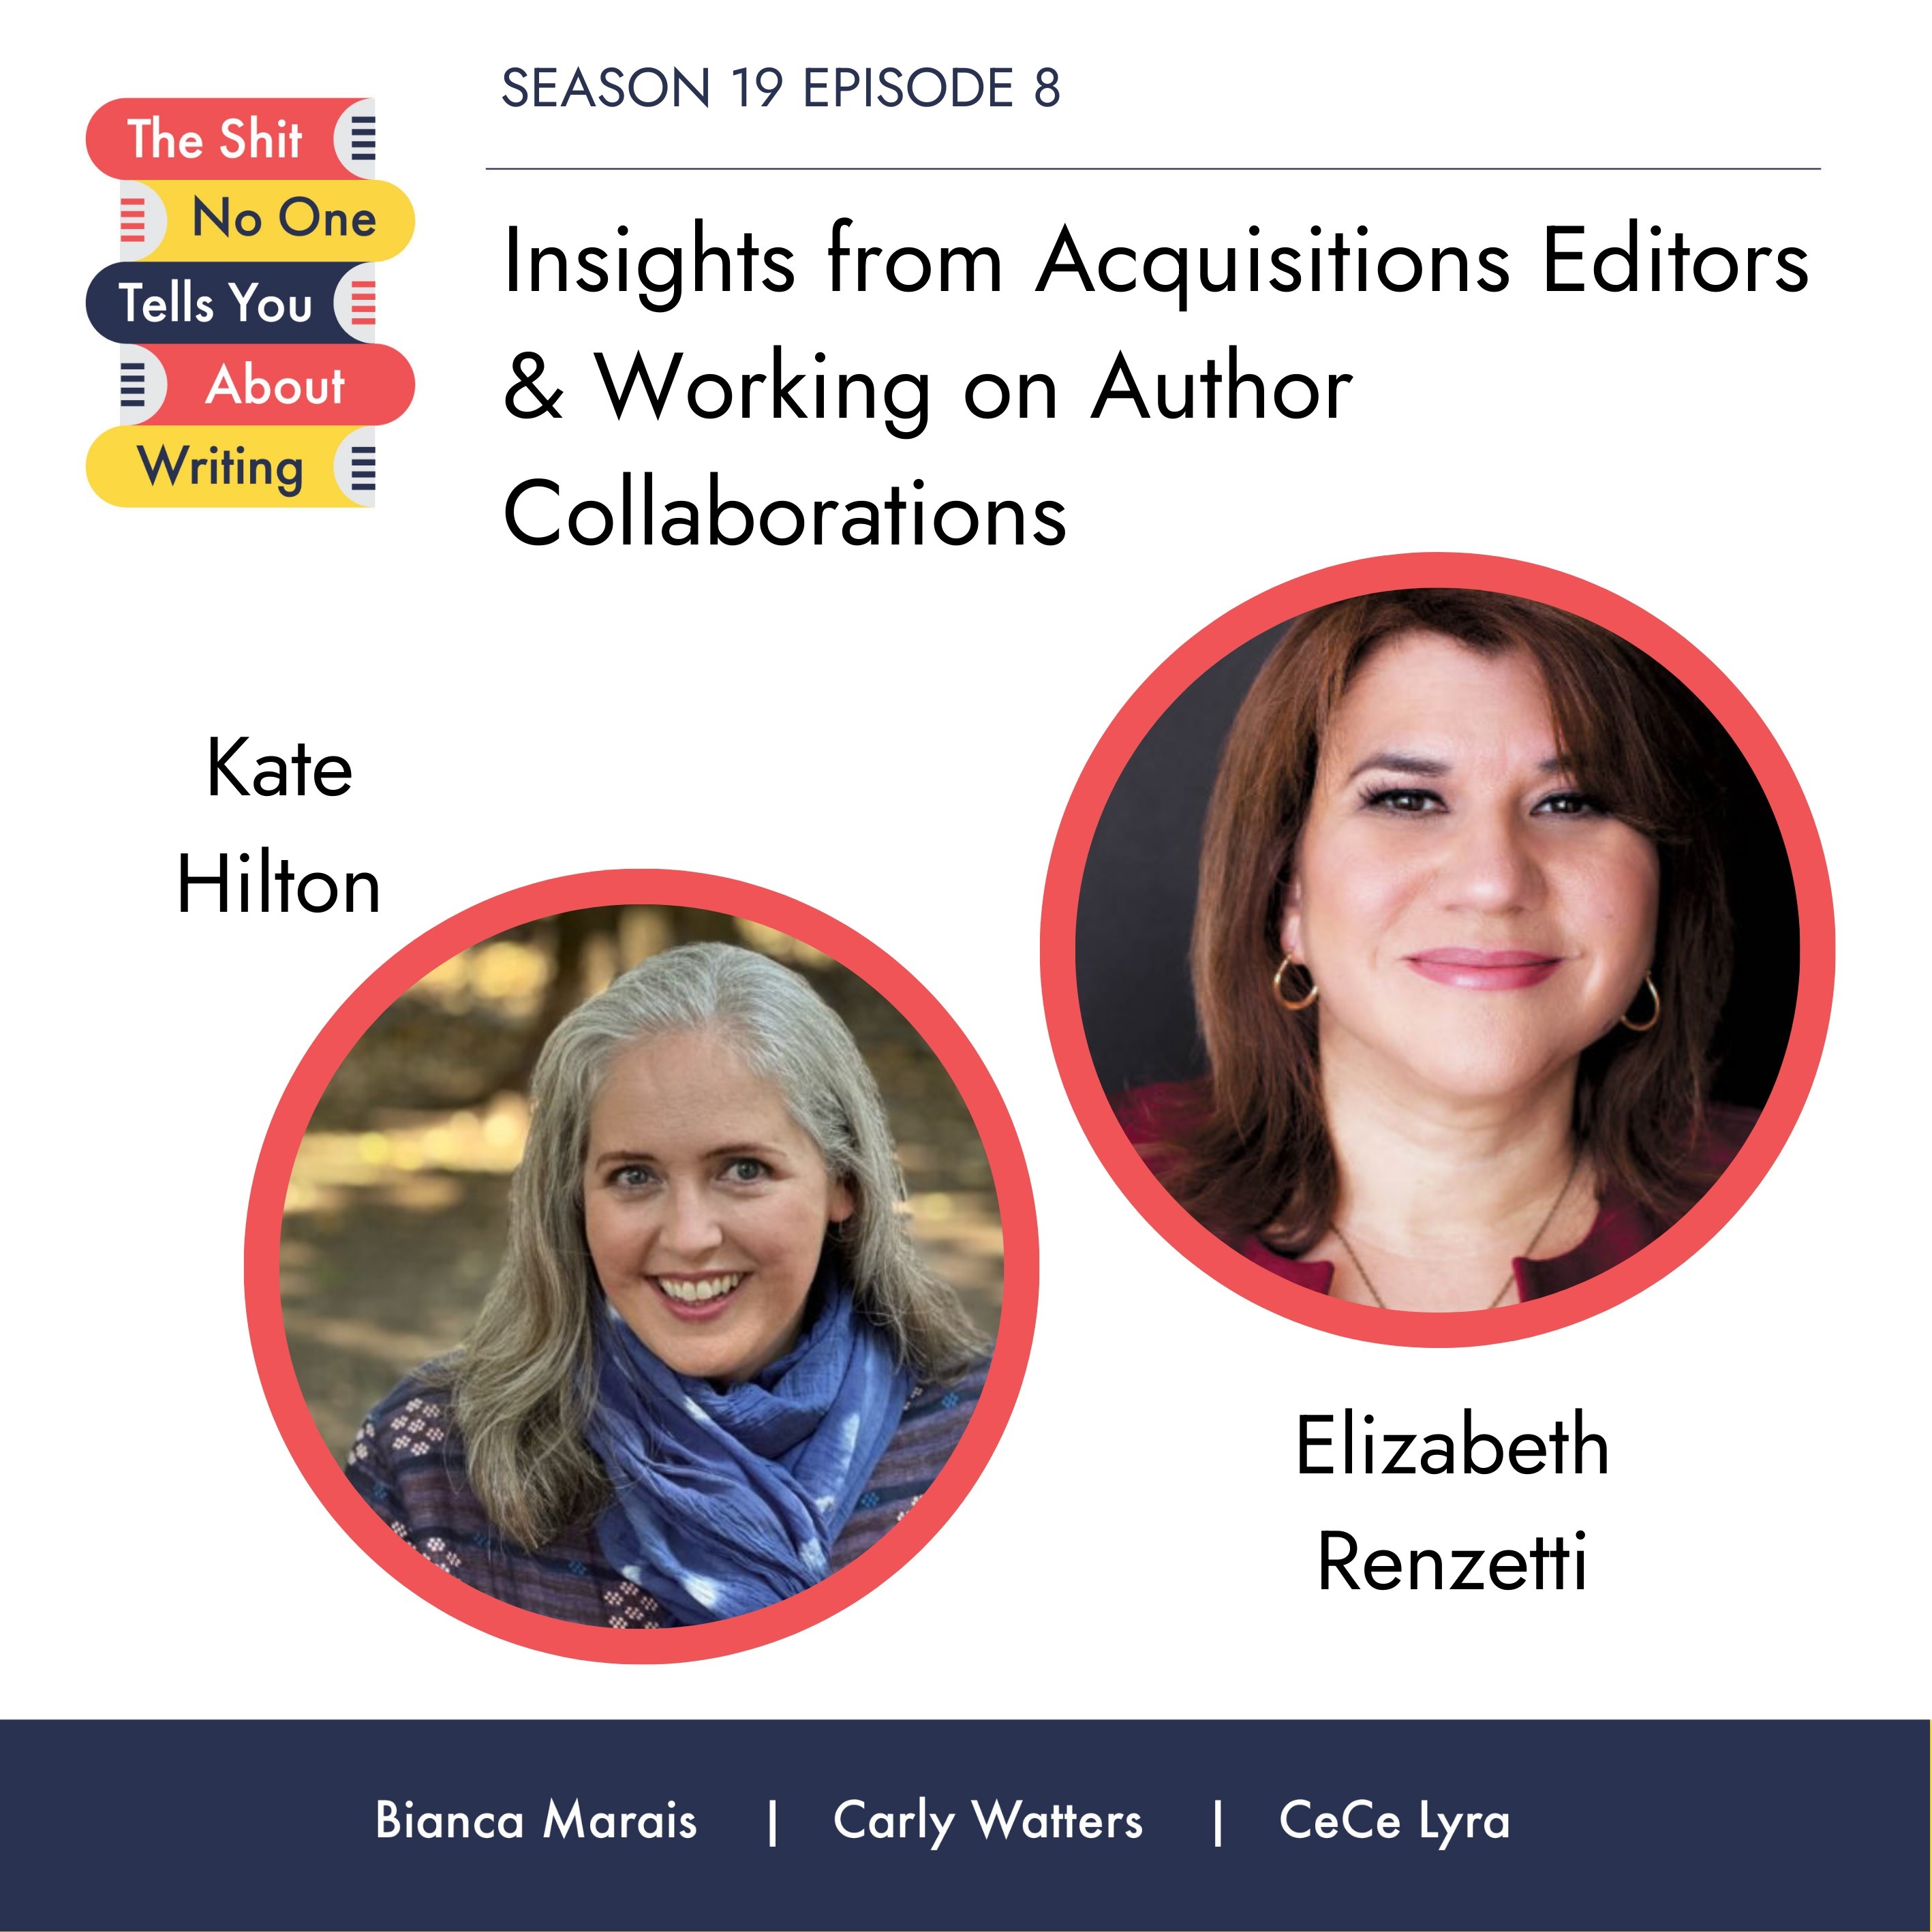 Insights from Acquisitions Editors & Working on Author Collaborations